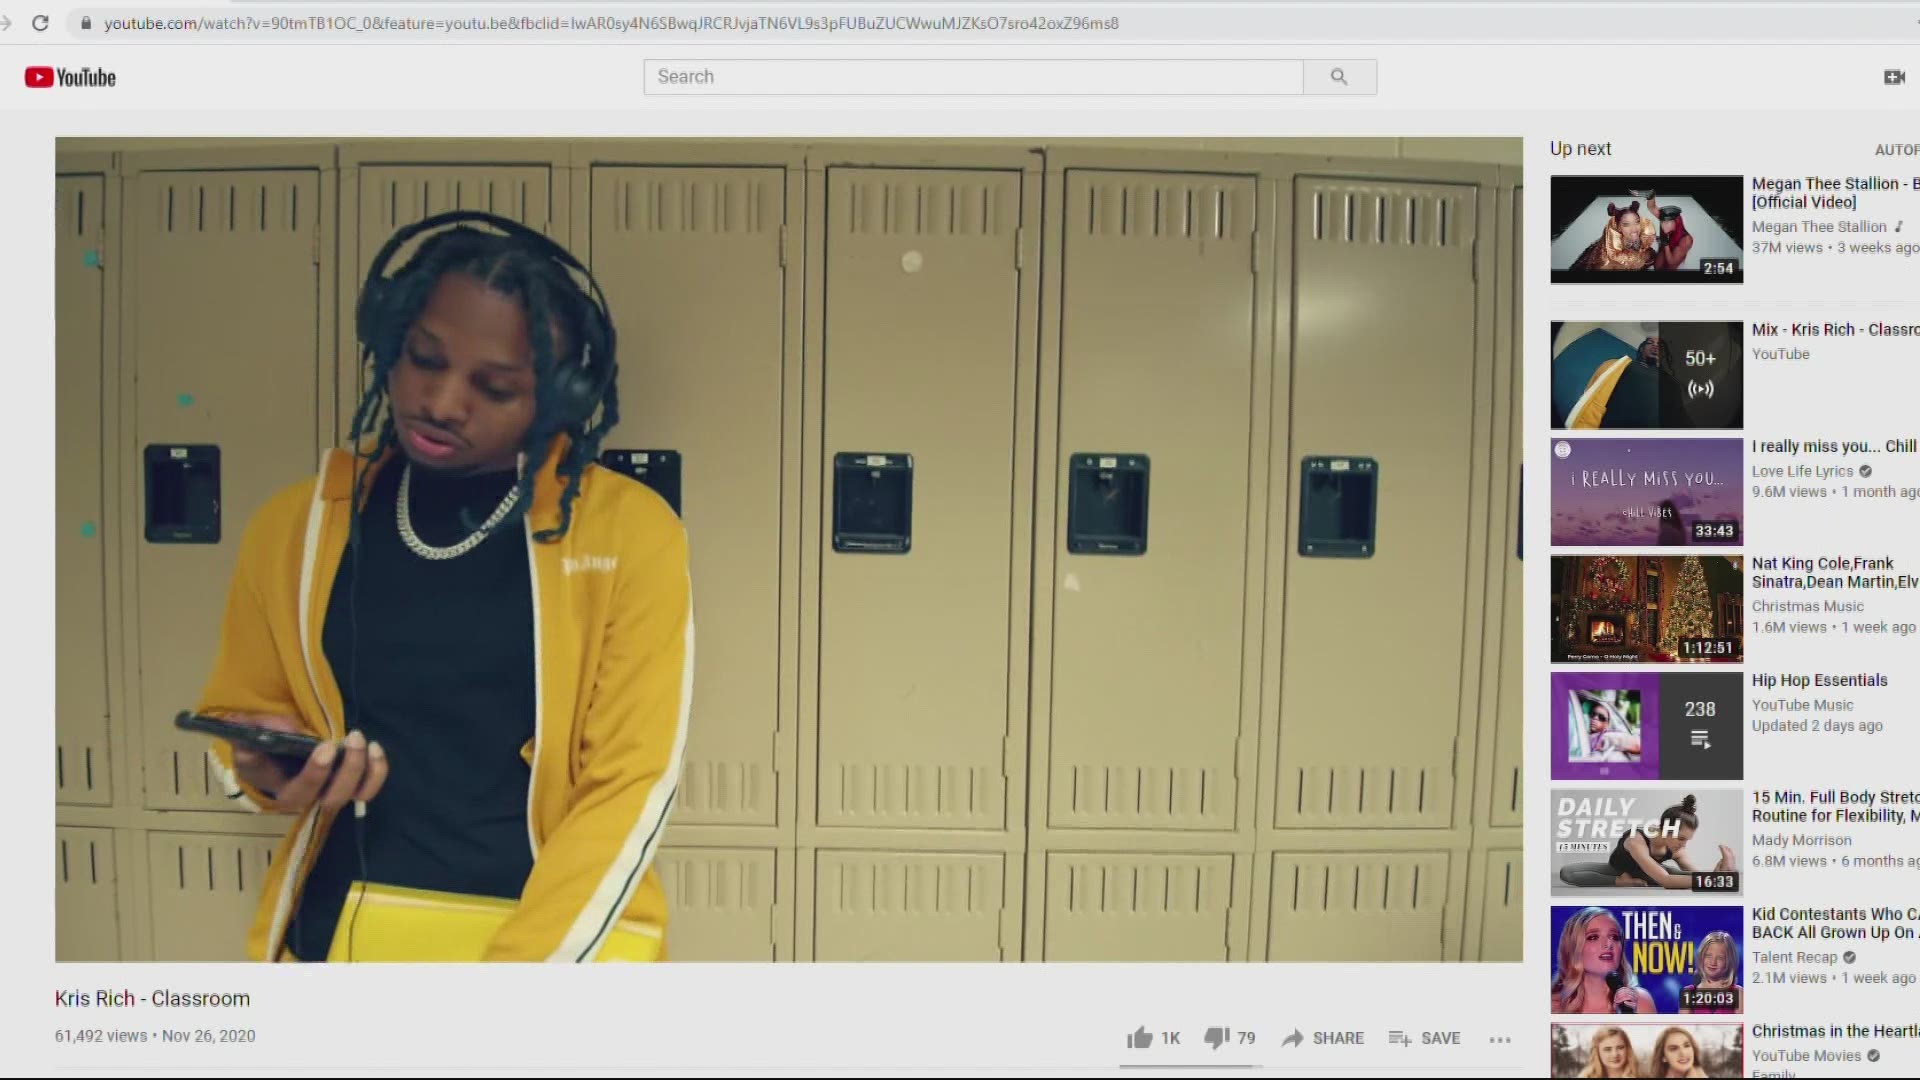 After the newly released music videos, many parents are angry with the school district.